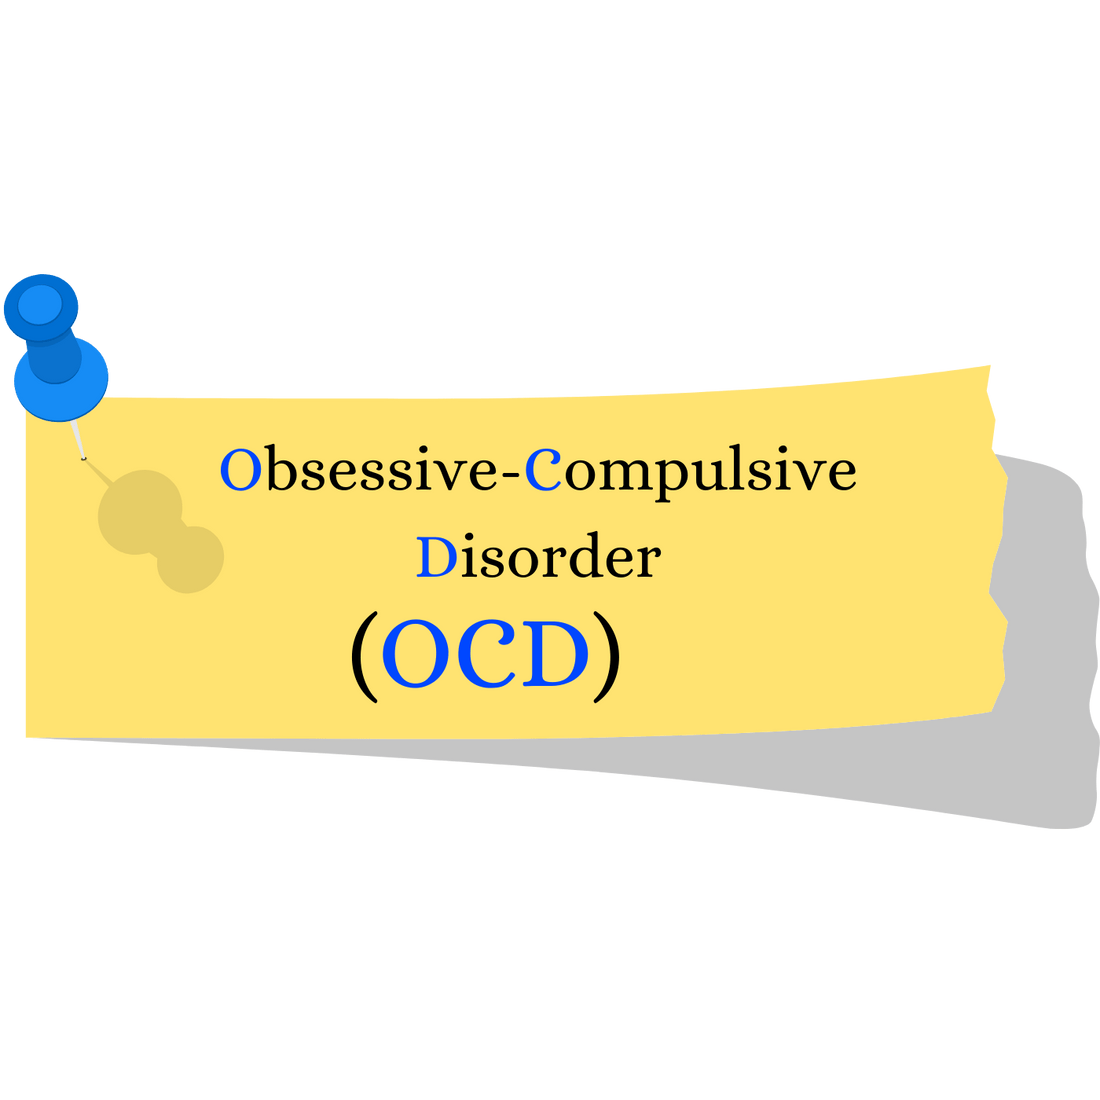 OCD- Obsessive Compulsive Disorder, definition, examples, causes, symptoms, diagnosis and treatments - Medical Arts Shop